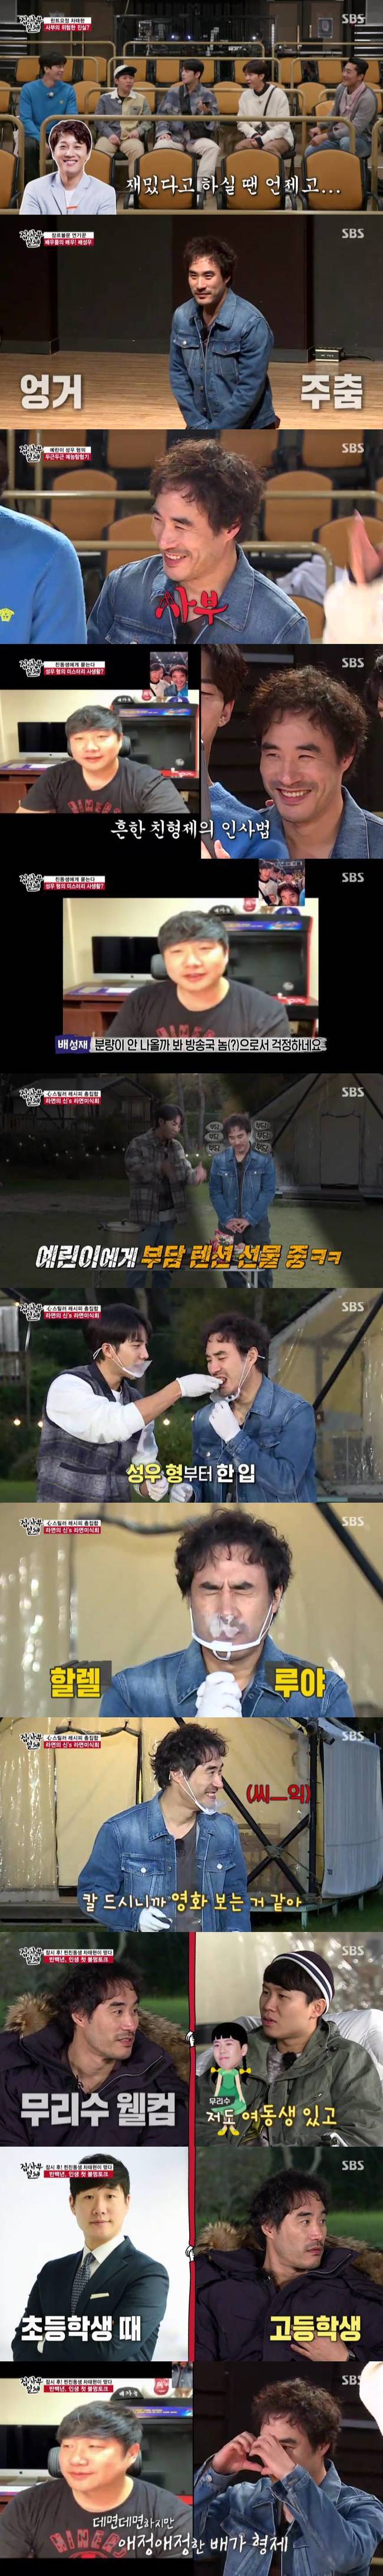 All The Butlers Bae Seong-woo Cha Tae-hyun laughed with a tit-for-tat chemistry.According to Nielsen Korea, a TV viewer rating research company, SBS All The Butlers, which was broadcast on October 18th, ranked first in the same time zone with 3.2% of the first part of 2049 Target TV viewer ratings, which is an important indicator of advertising officials and leads the topic, and 3.5% of the second part (based on Nielsen Korea metropolitan area households).Furniture TV viewer ratings were 4.7% in Part 1, 5.4% in Part 2, and 6.9% in Part 2.The production team introduced the master, saying, The life motto of the master is Simple is the best.Cha Tae-hyun appeared as a hint fairy and gave a hint that the actor recognized by the actors as acting actor.Its going to be a tough day, Cha Tae-hyun said, but this brothers life is simple and nothing, and I asked him if he was coming out alone.The master was actor Bae Seong-woo; the shy-starred Bae Seong-woo, who appeared shyly behind the screen, appeared awkward in her first solo appearance in the entertainment.He was not sleeping all night with tension. Bae Seong-woo said, The concept was a master.I came too heavy, he said, but he replied, Sabu as for the title he hoped.Bae Seong-woo, who is also the brother of Bae Seong-jae announcer, said, (All The Butlers) my brother said, What do you teach me, and made the members laugh.He then made a phone call with Bae Seong-jae, and Bae Seong-jae said, I was worried as a station guy (?) because I did not have enough.Bae Seong-jae said, I have lived for more than 30 years thinking about acting, but I do not know the truth.I feel like the first person today. He revealed his real brother Chemi.On the day, Bae Seong-woo and the members went camping, where the members started a ramen gourmet.Lee Seung-gi gave Bae Seong-woo a burden, saying, If the god of ramen, the vesicle is your sister, introduce the secret.Lee Seung-gi then started making rib noodles and Yang Se-hyeong made squid bibim noodles.Bae Seong-woo, who said, I think ramen that is close to the original intention is the most delicious, showed the biggest steamed reaction since shooting the taste of ribs prepared by Lee Seung-gi and laughed, I think ribs are more delicious than basic ramen.Bae Seong-woo and the members sat in front of the fire and talked. Lee Seung-gi said, We have six things in common.Bae Seong-woo said, Im six years old with my brother. My mother said, Youve had six more years of parental love somehow, so be nice.So I did not get to run errands, so I got rid of it. He thought, I am so glad that my brother first announced his name.I can miss it, after all. He said, I was grateful for the fact that my brother was responsible for some of the things he was responsible for, even though he had not had enough home.I was enjoying my work, but I did not help my house much. 